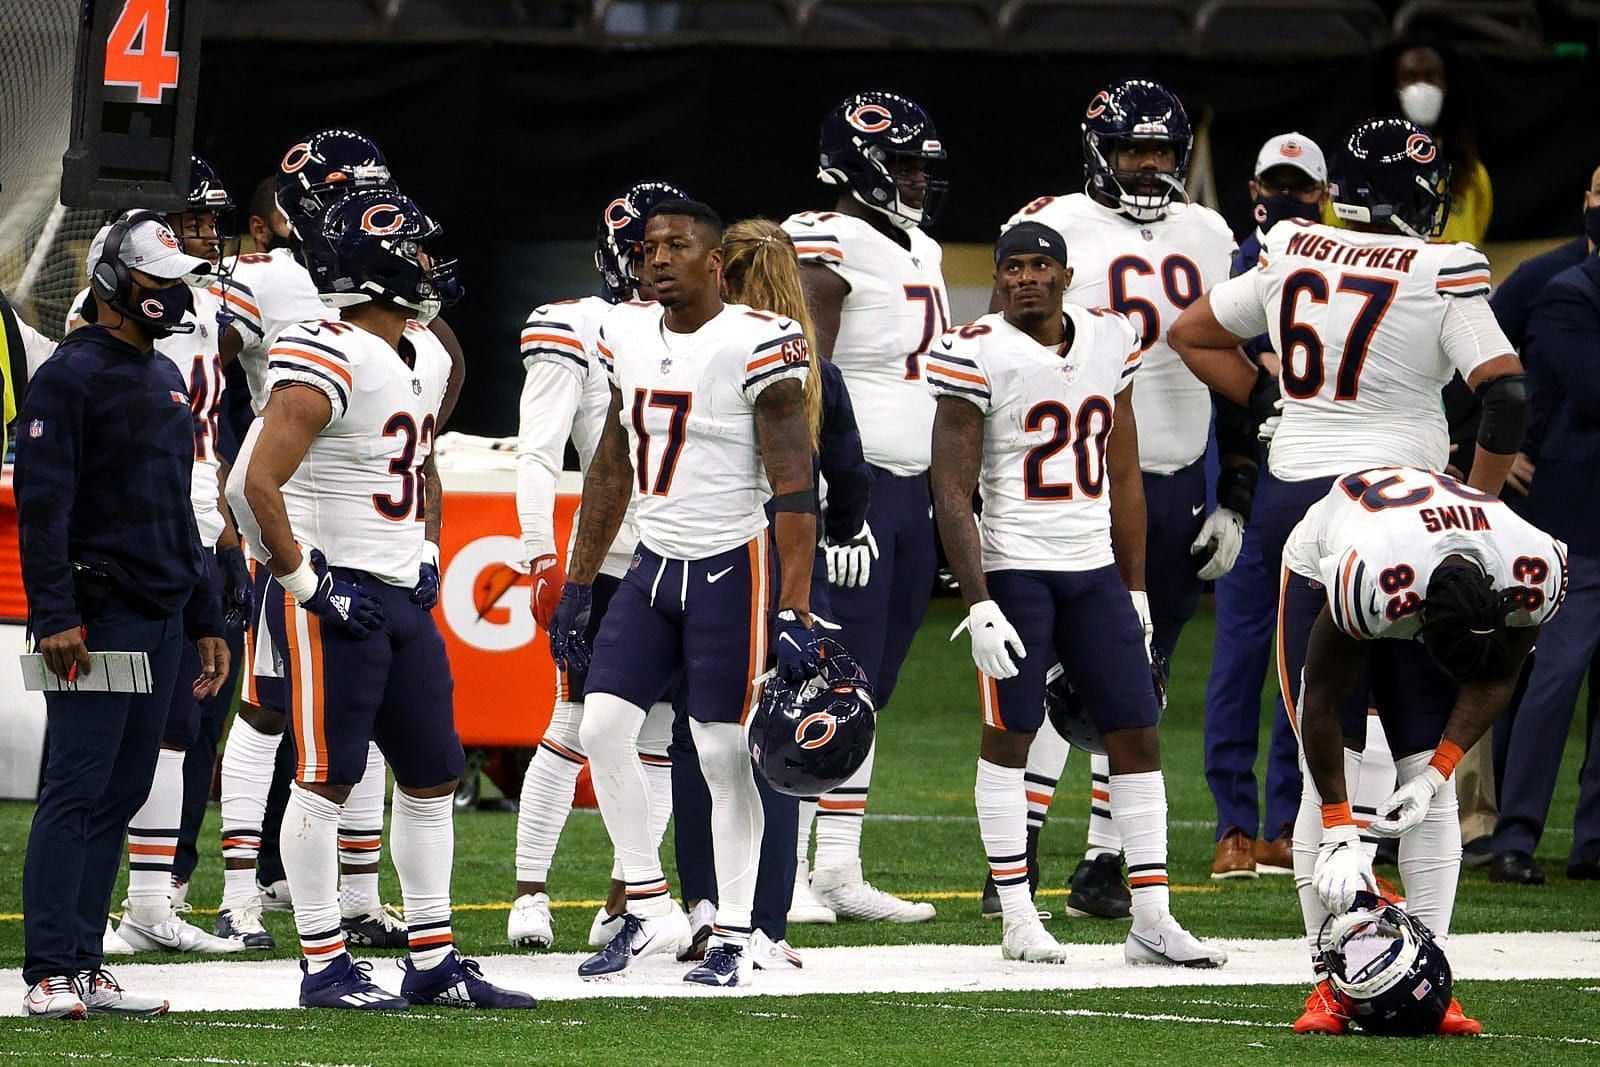 Chicago Bears team palyers on the sideline during a regular season game.